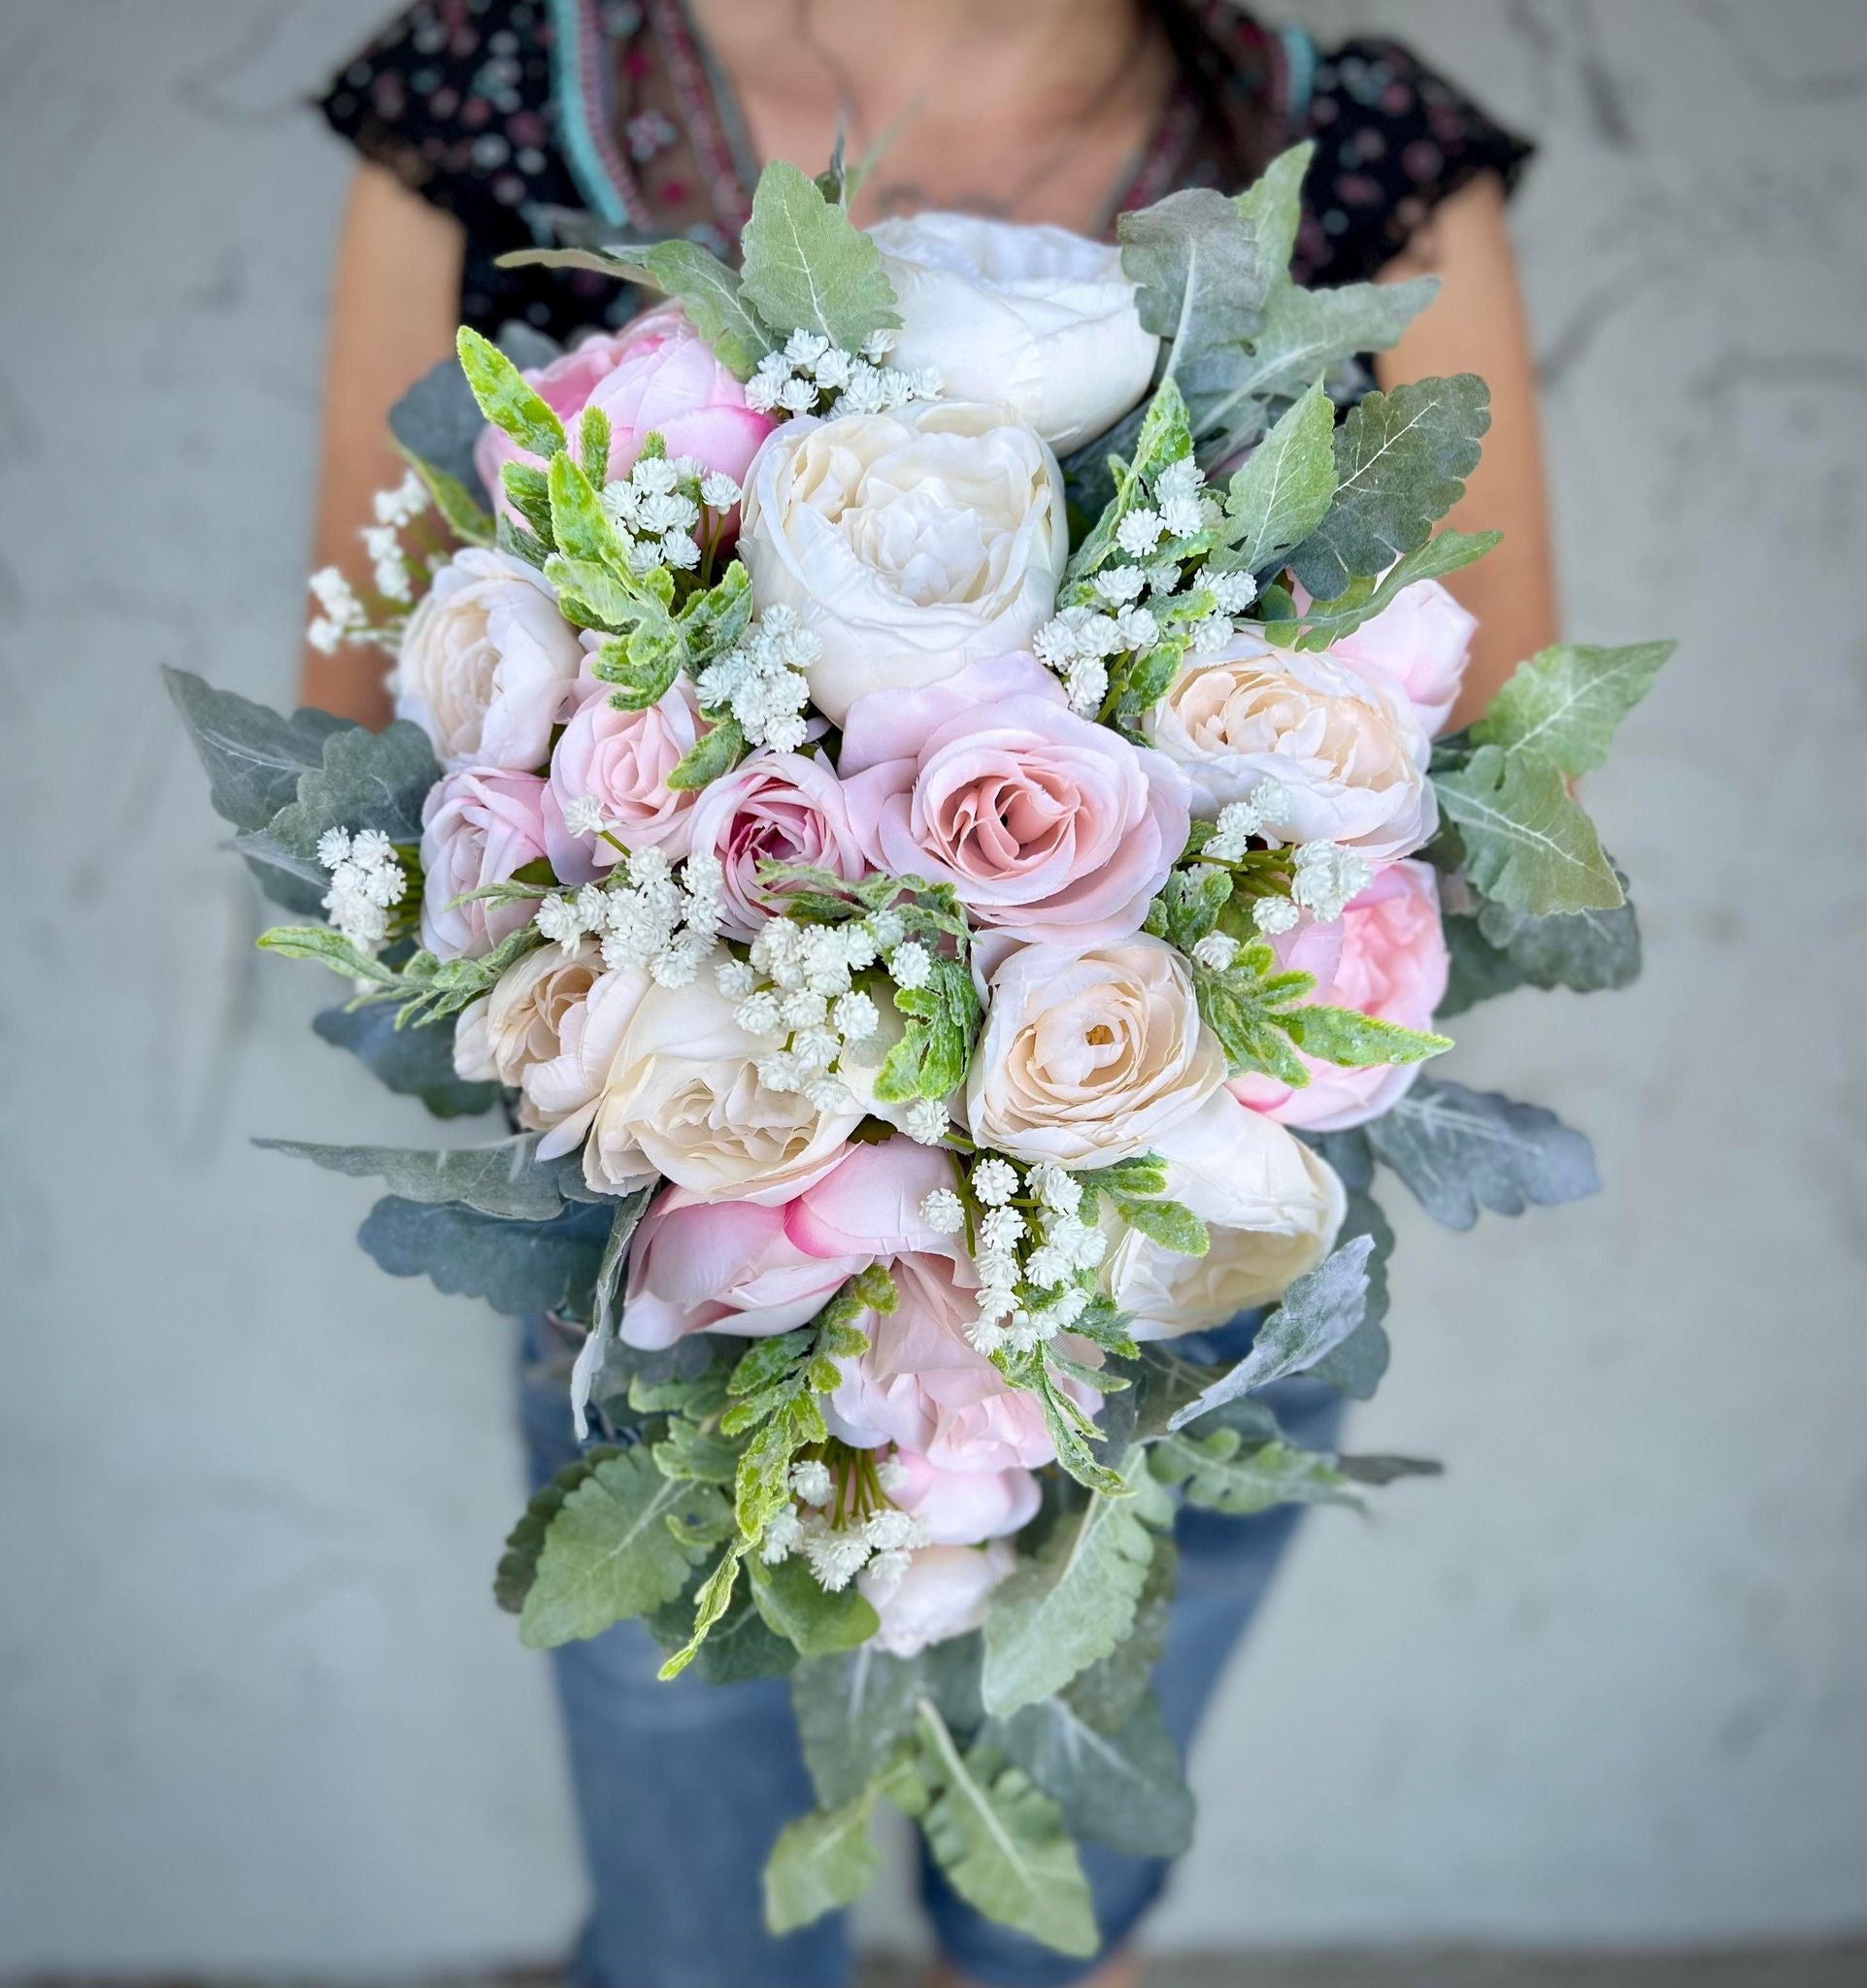 DIY Wedding Bouquet with soft pinks, ivory and baby's breath filler 😍